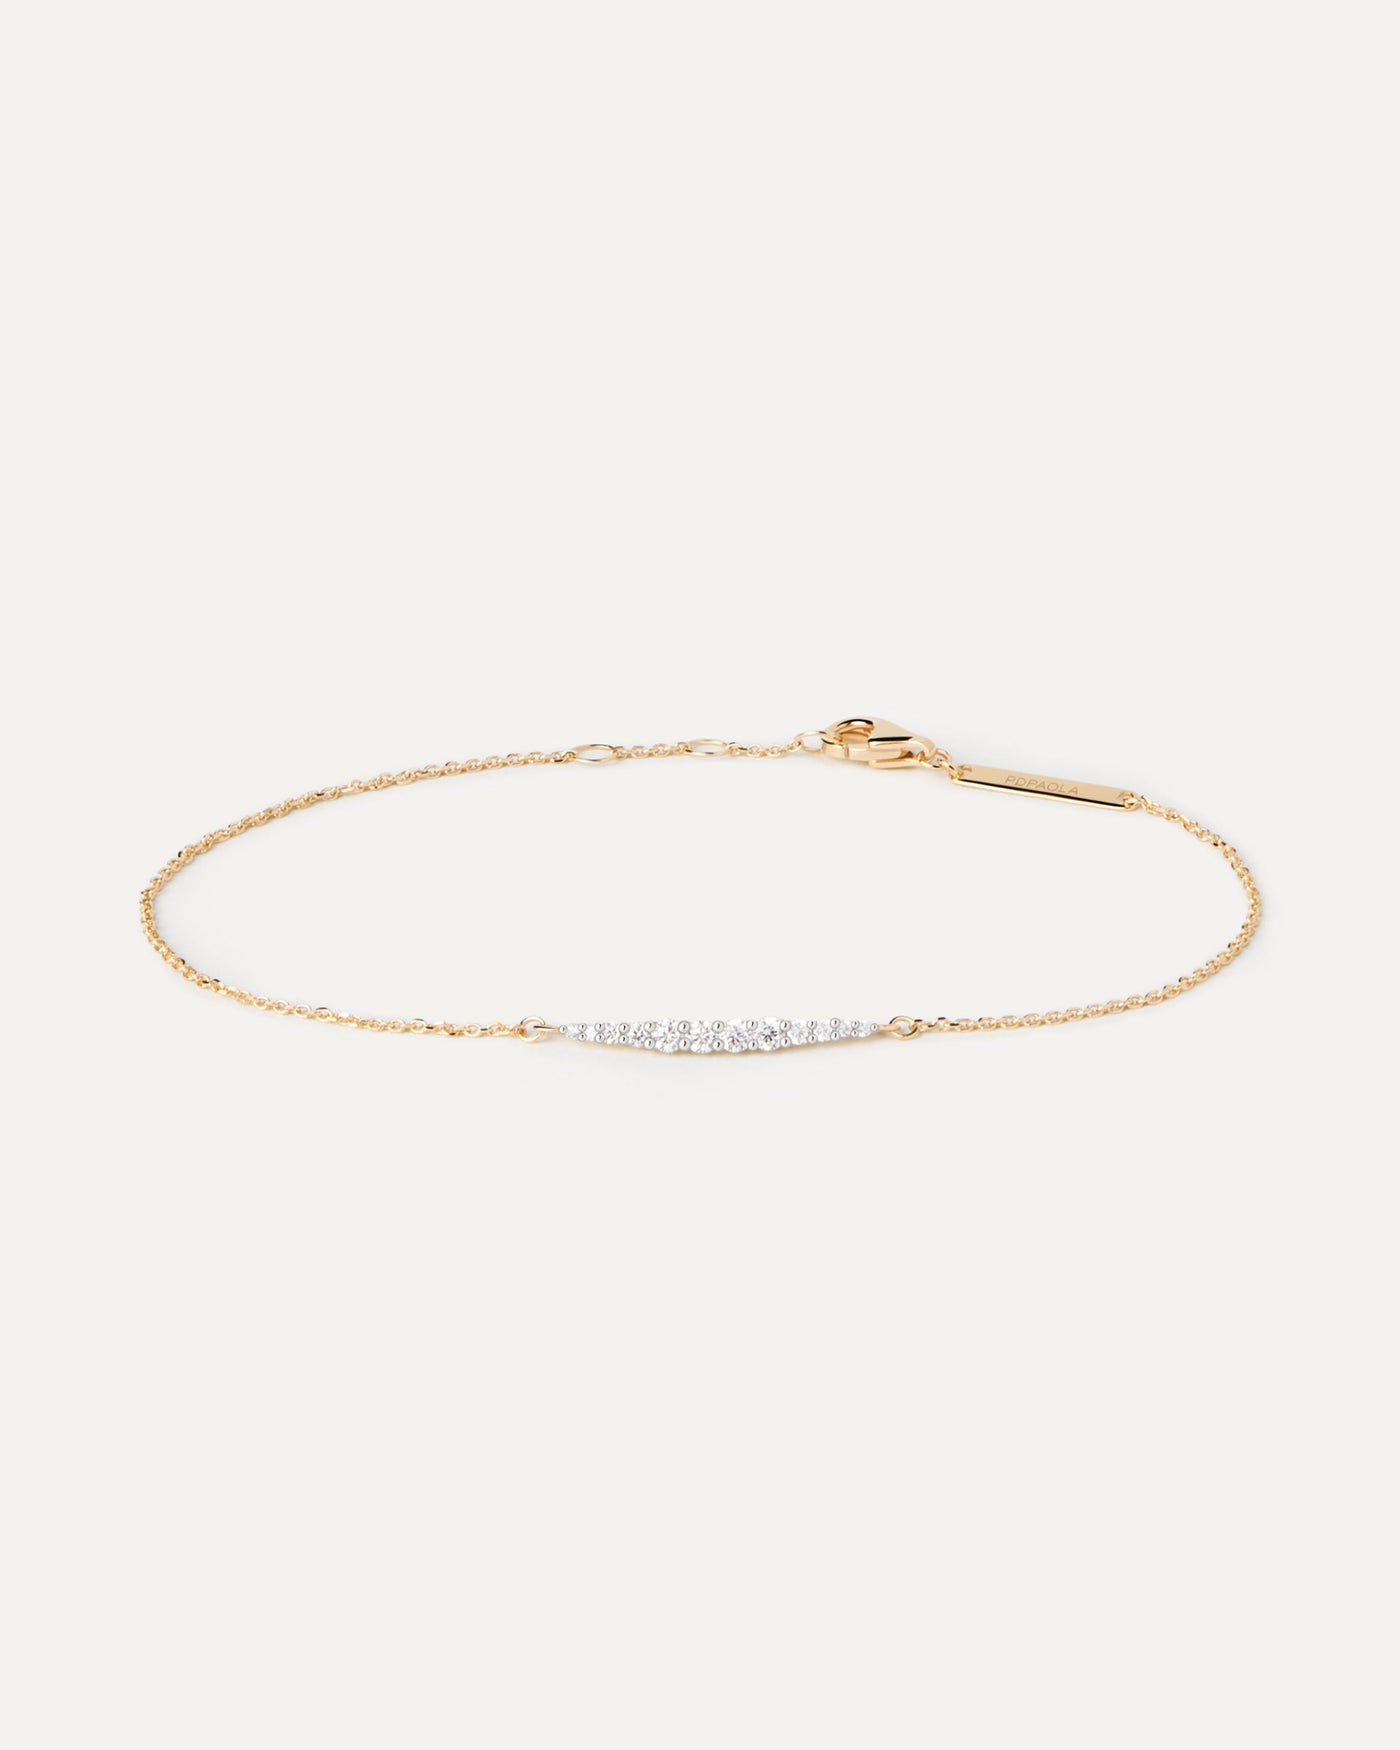 2023 Selection | Diamonds And Gold Kate Bracelet. Solid yellow gold bracelet with a 12-pavé diamond motiv of 0.17 carats. Get the latest arrival from PDPAOLA. Place your order safely and get this Best Seller. Free Shipping.